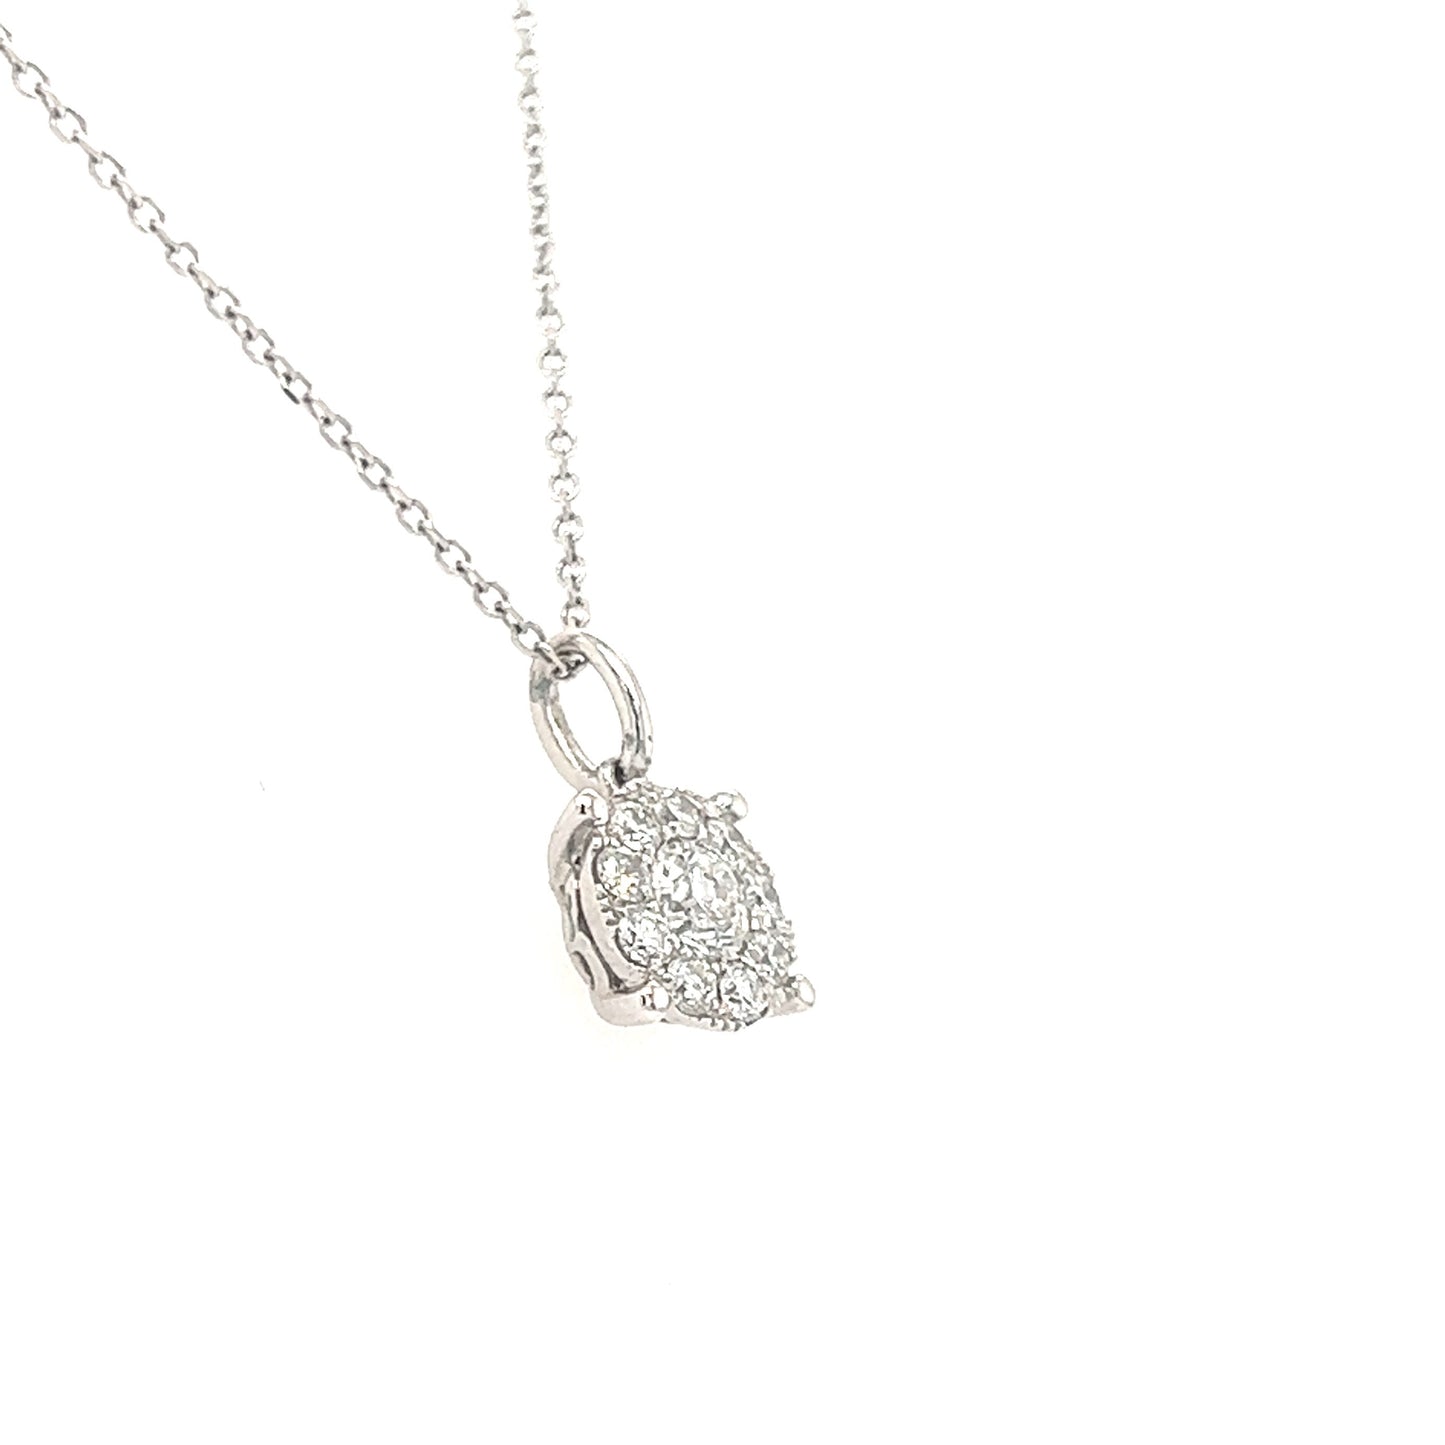 Diamond Pendant with Diamond Halo in 14K White Gold Pendant and Chain Right Side View